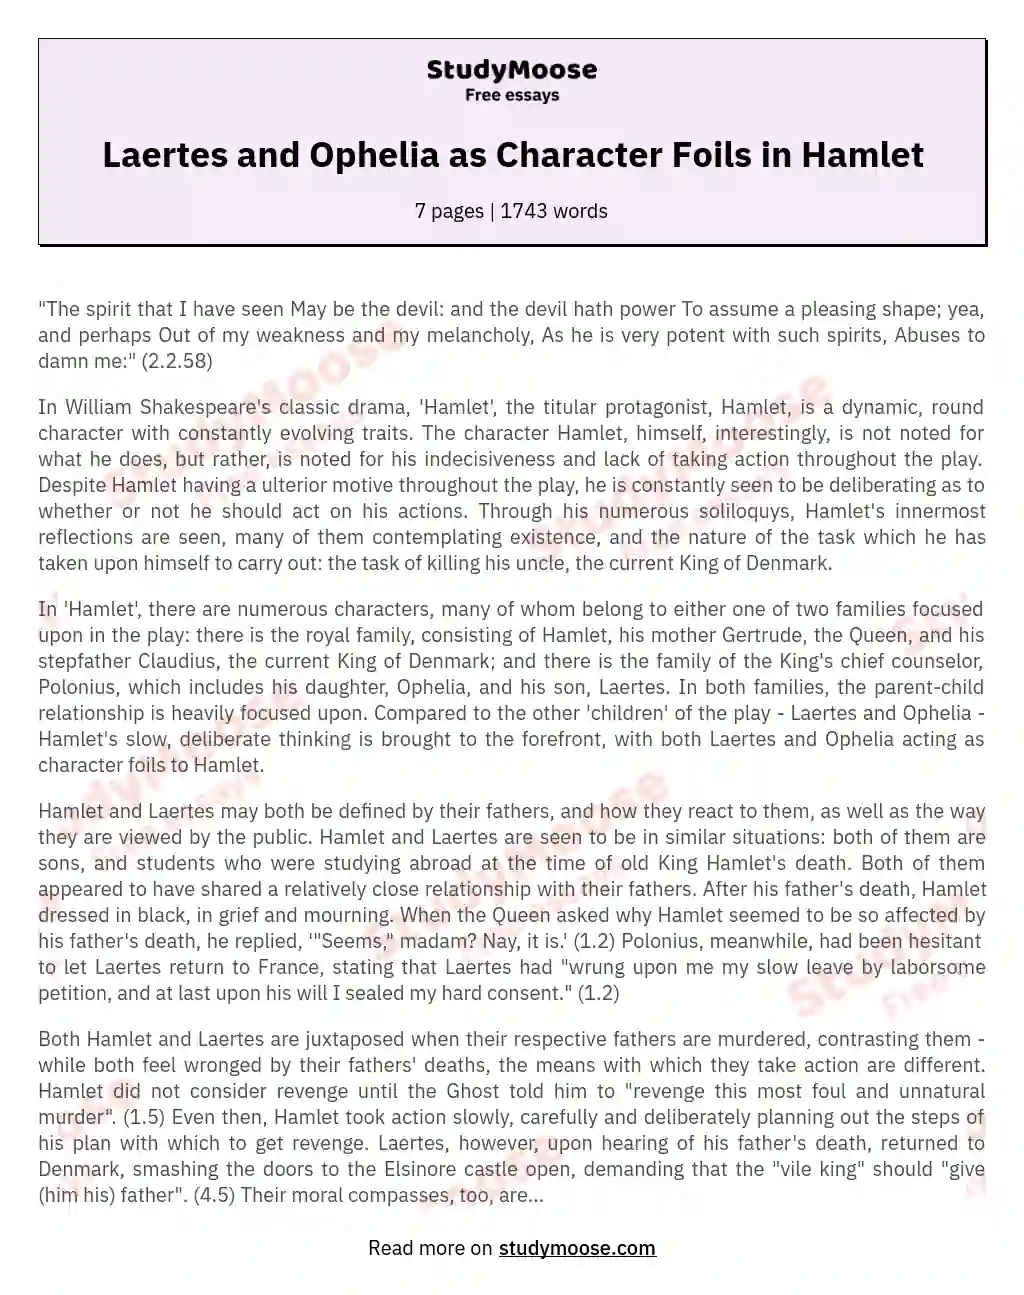 Laertes and Ophelia as Character Foils in Hamlet essay